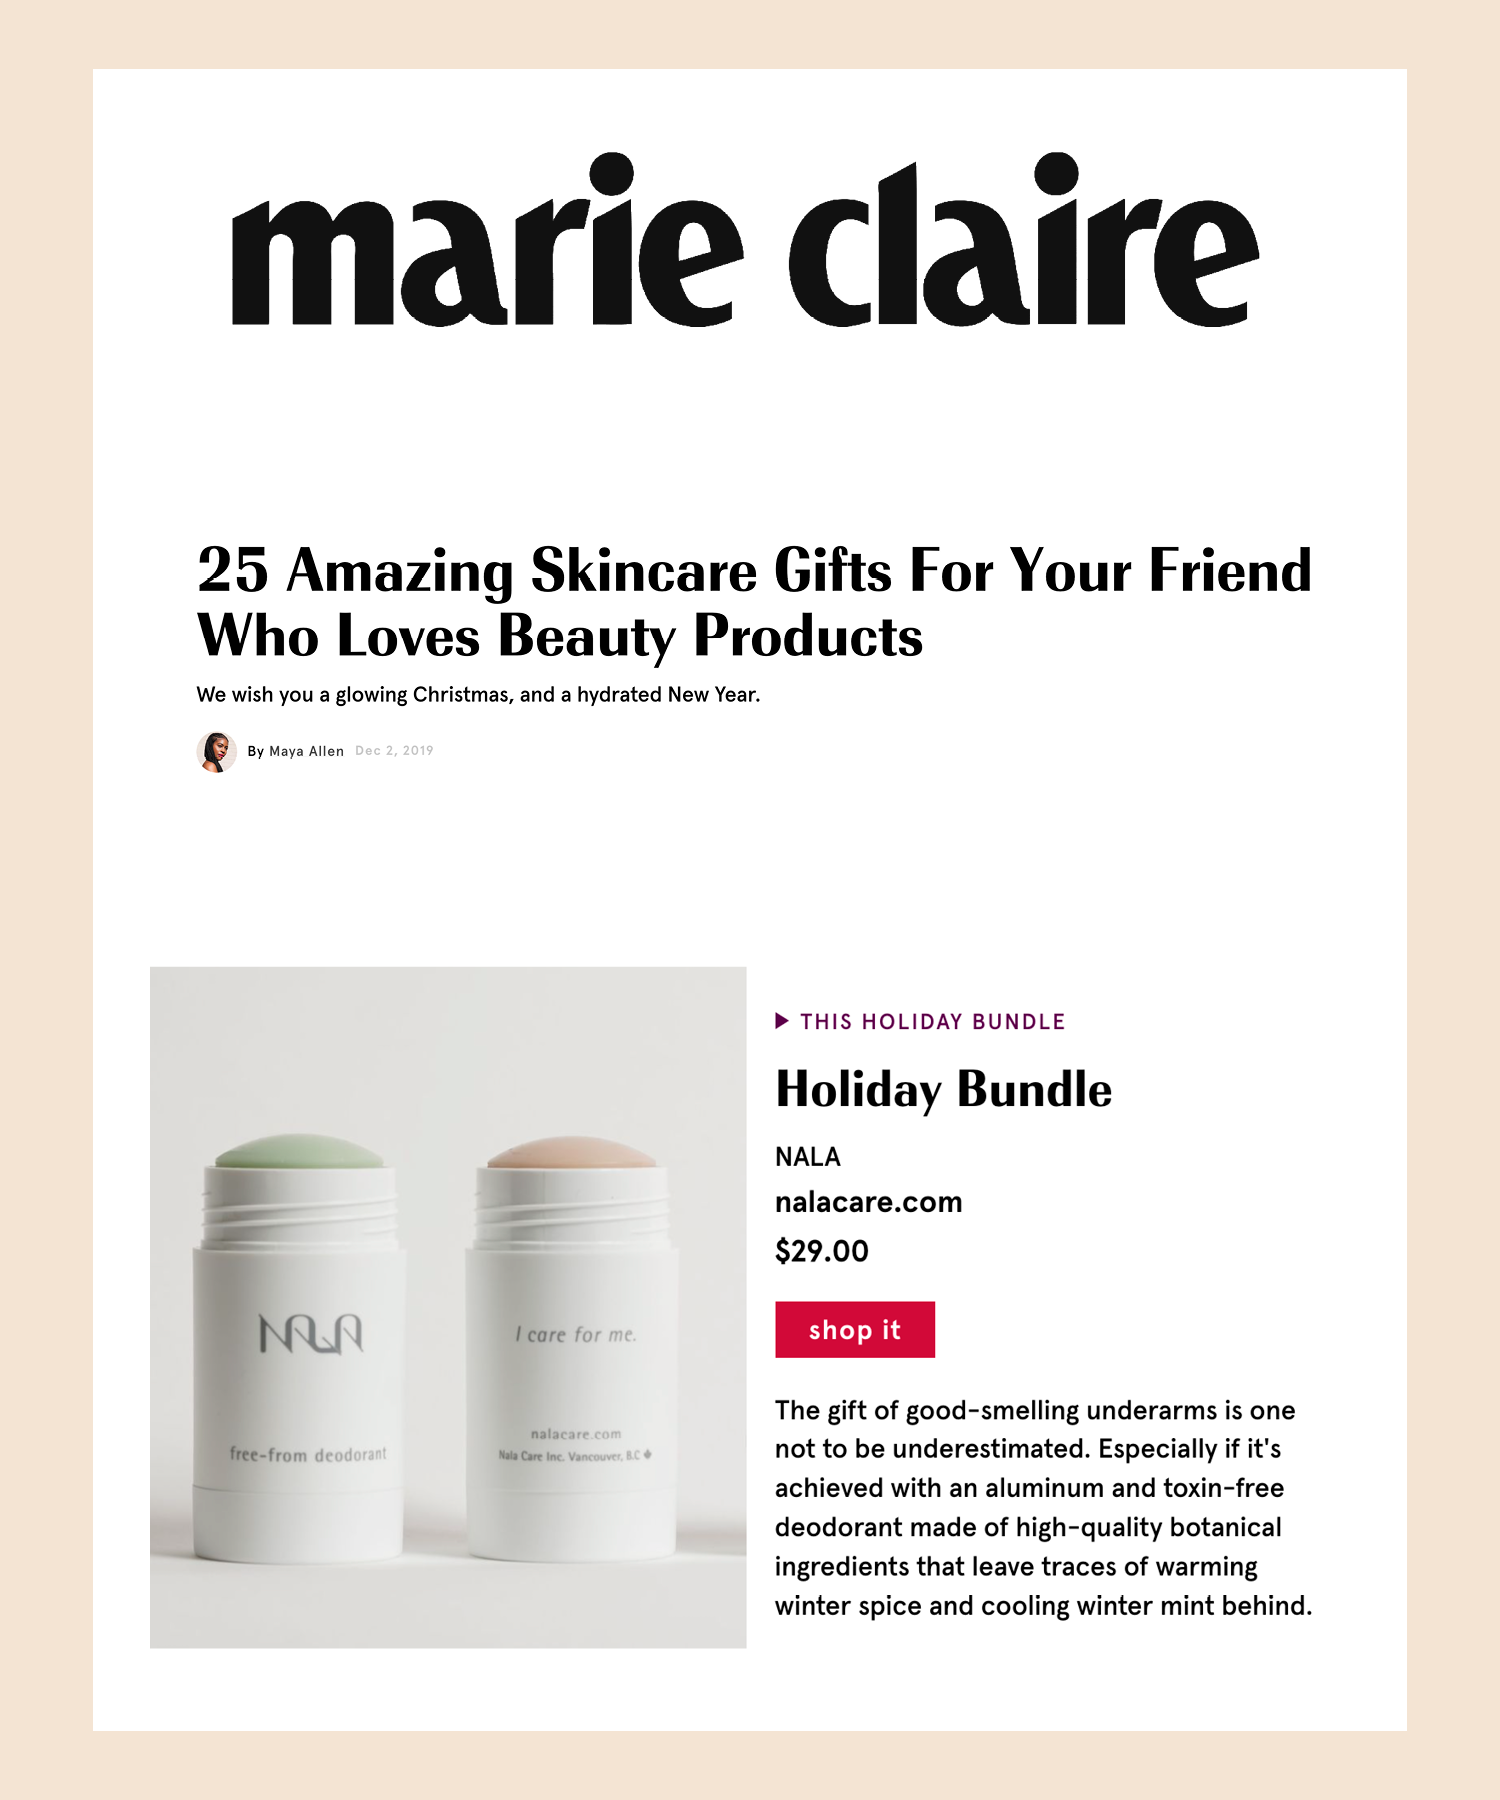 25 Amazing Skincare Gifts For Your Friend Who Loves Beauty Products